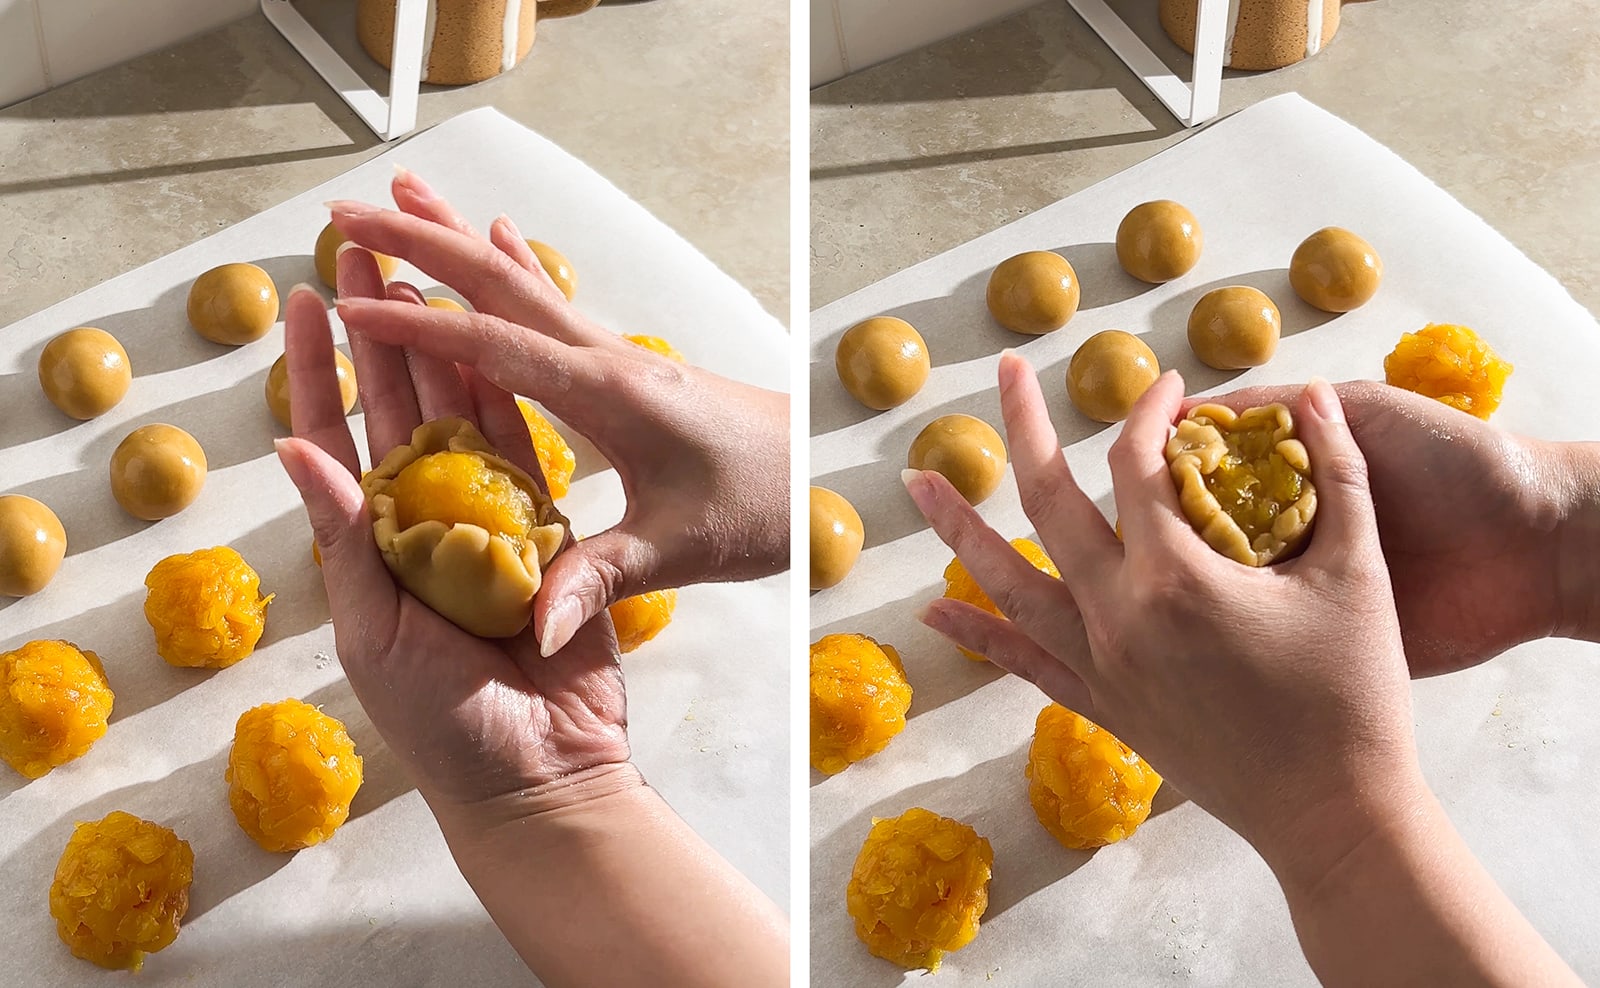 Left to right: hands wrapping dough around pineapple filling, hands sealing dough around filling.